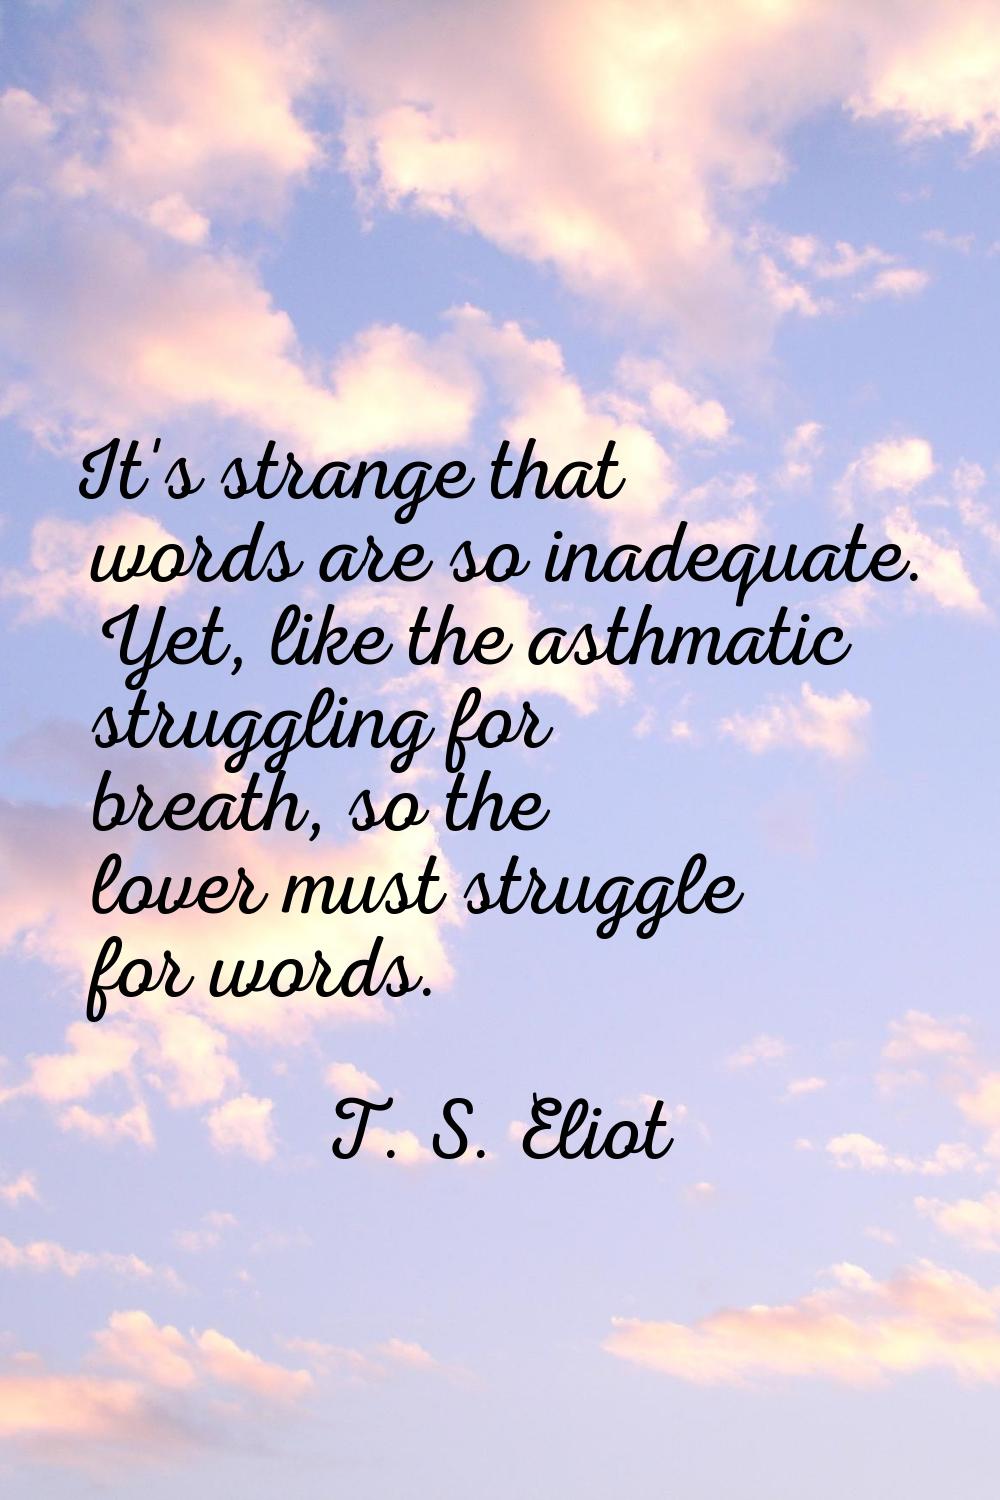 It's strange that words are so inadequate. Yet, like the asthmatic struggling for breath, so the lo